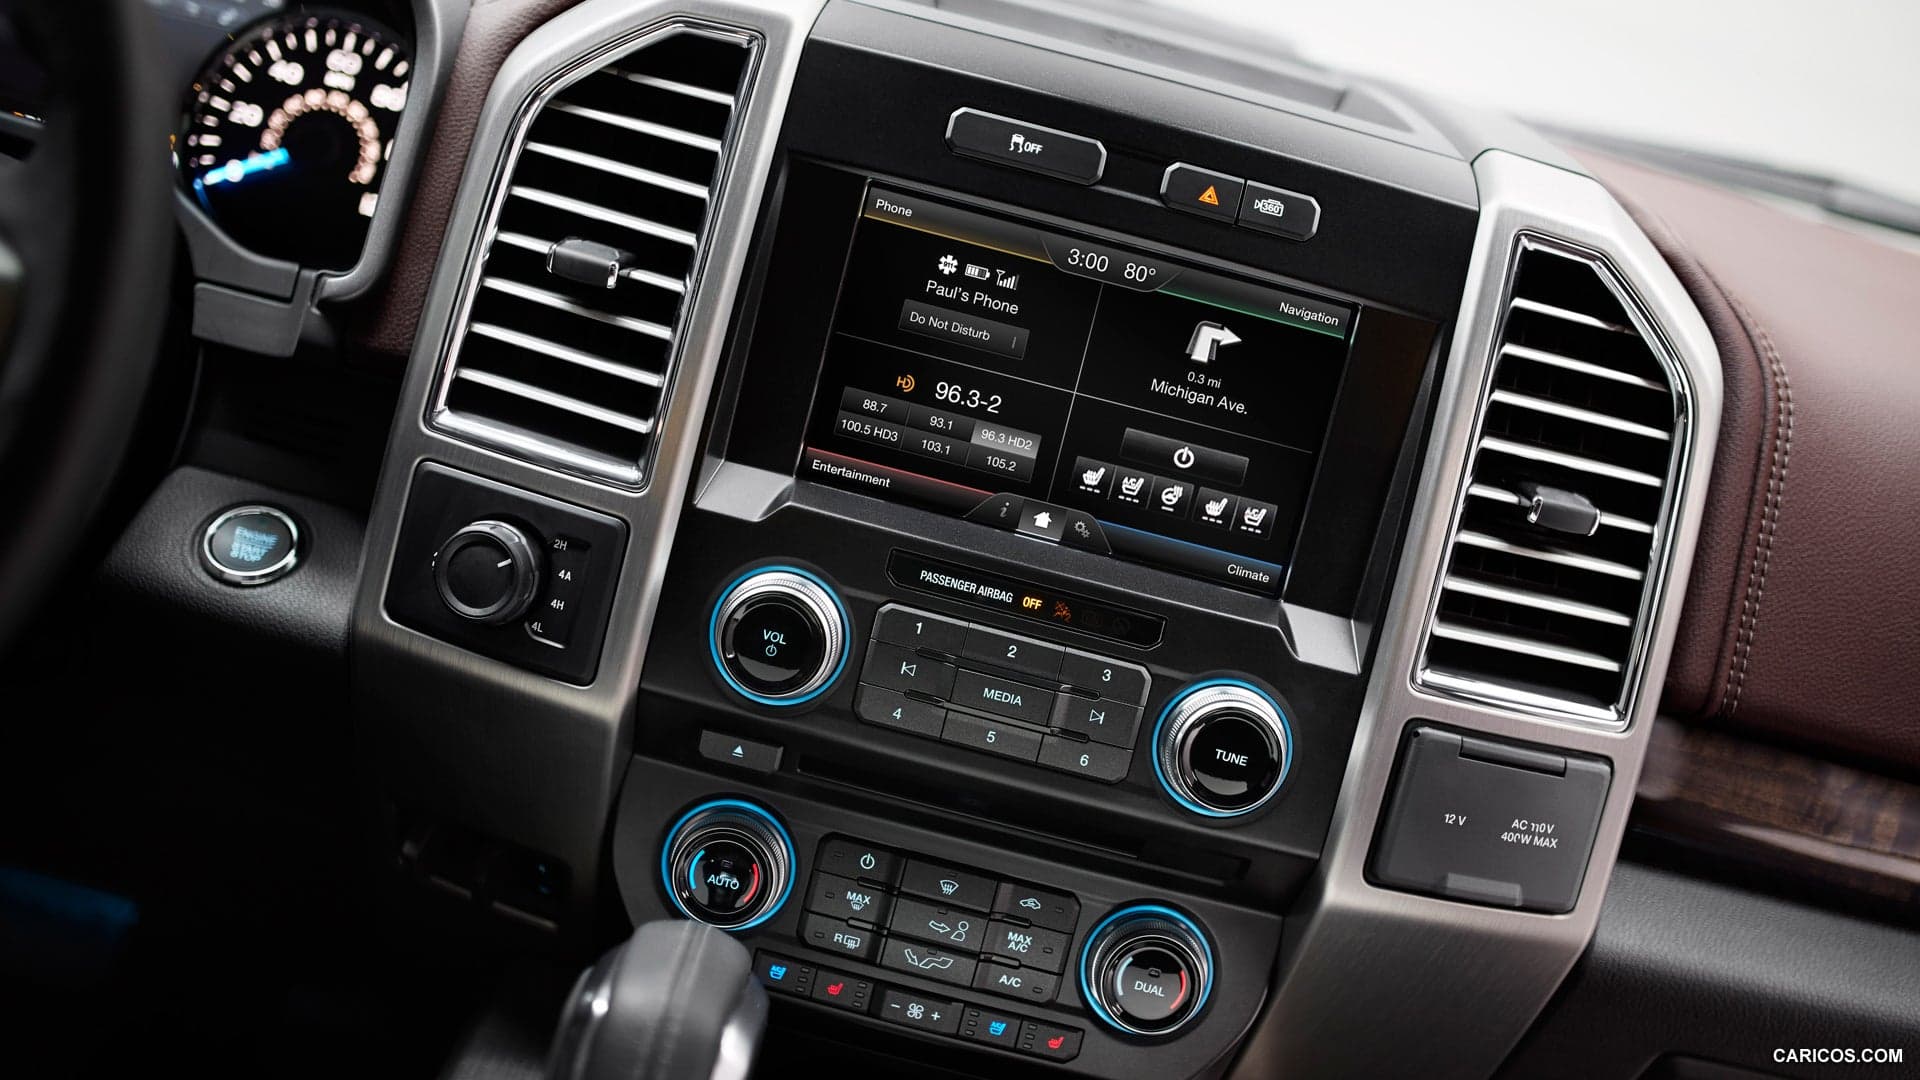 Ford SmartLink Introduces New Tech Features to Older Models